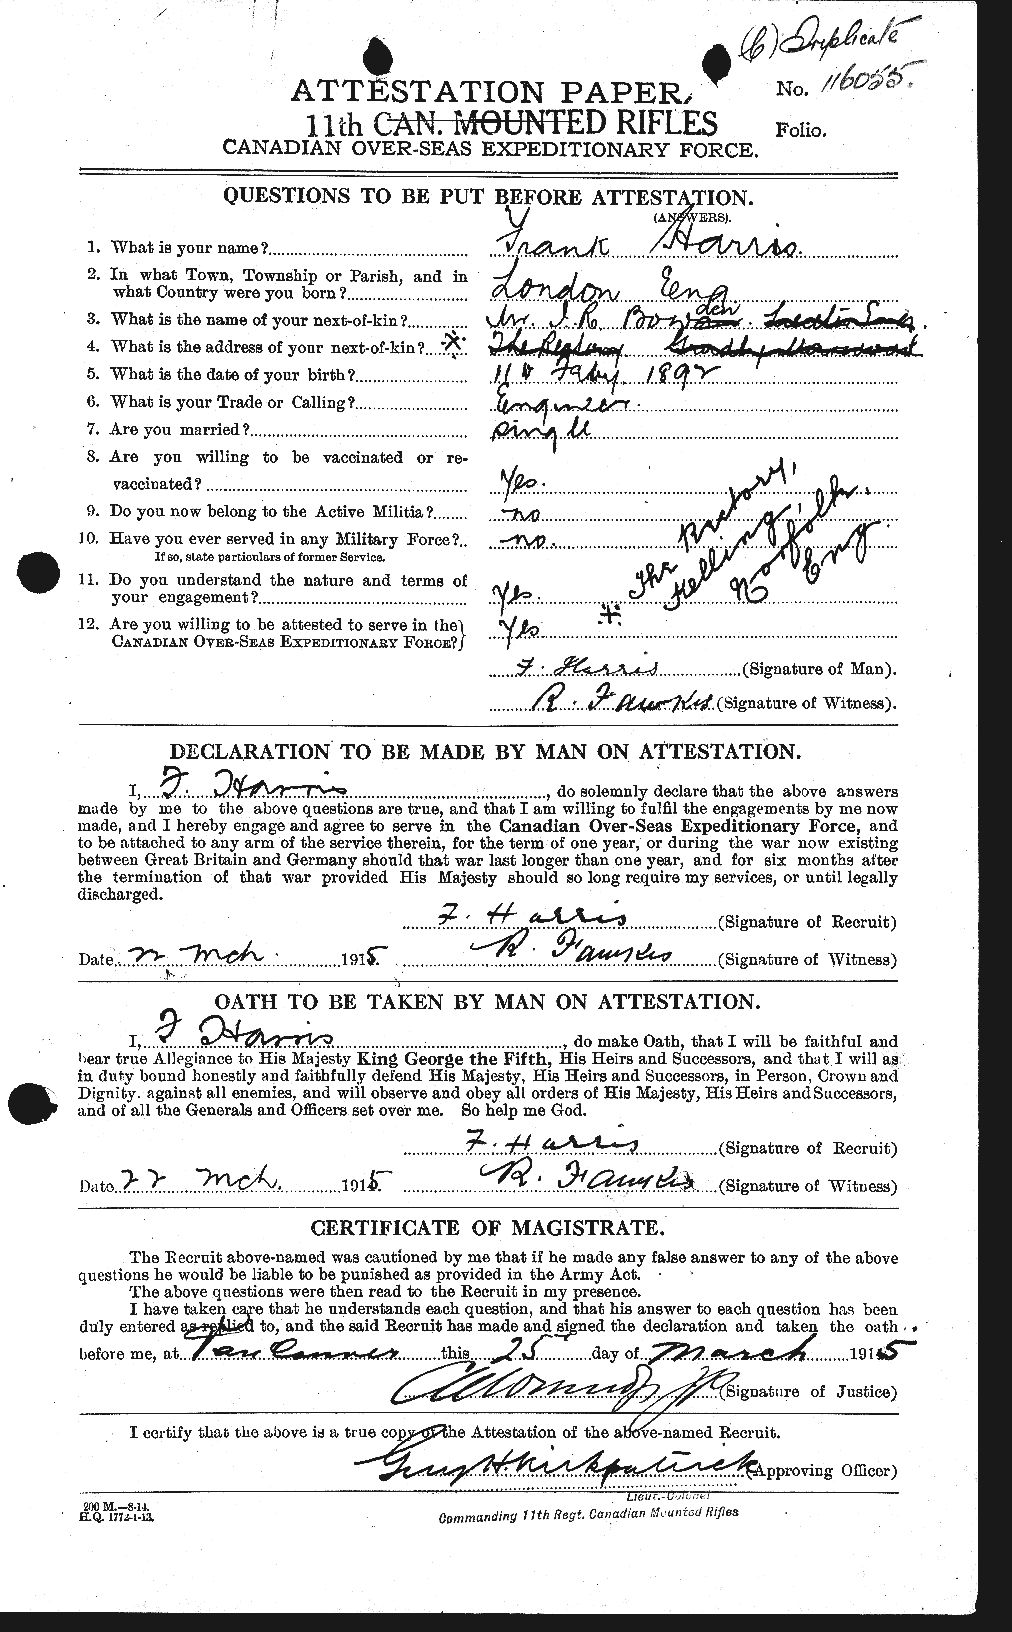 Personnel Records of the First World War - CEF 379318a